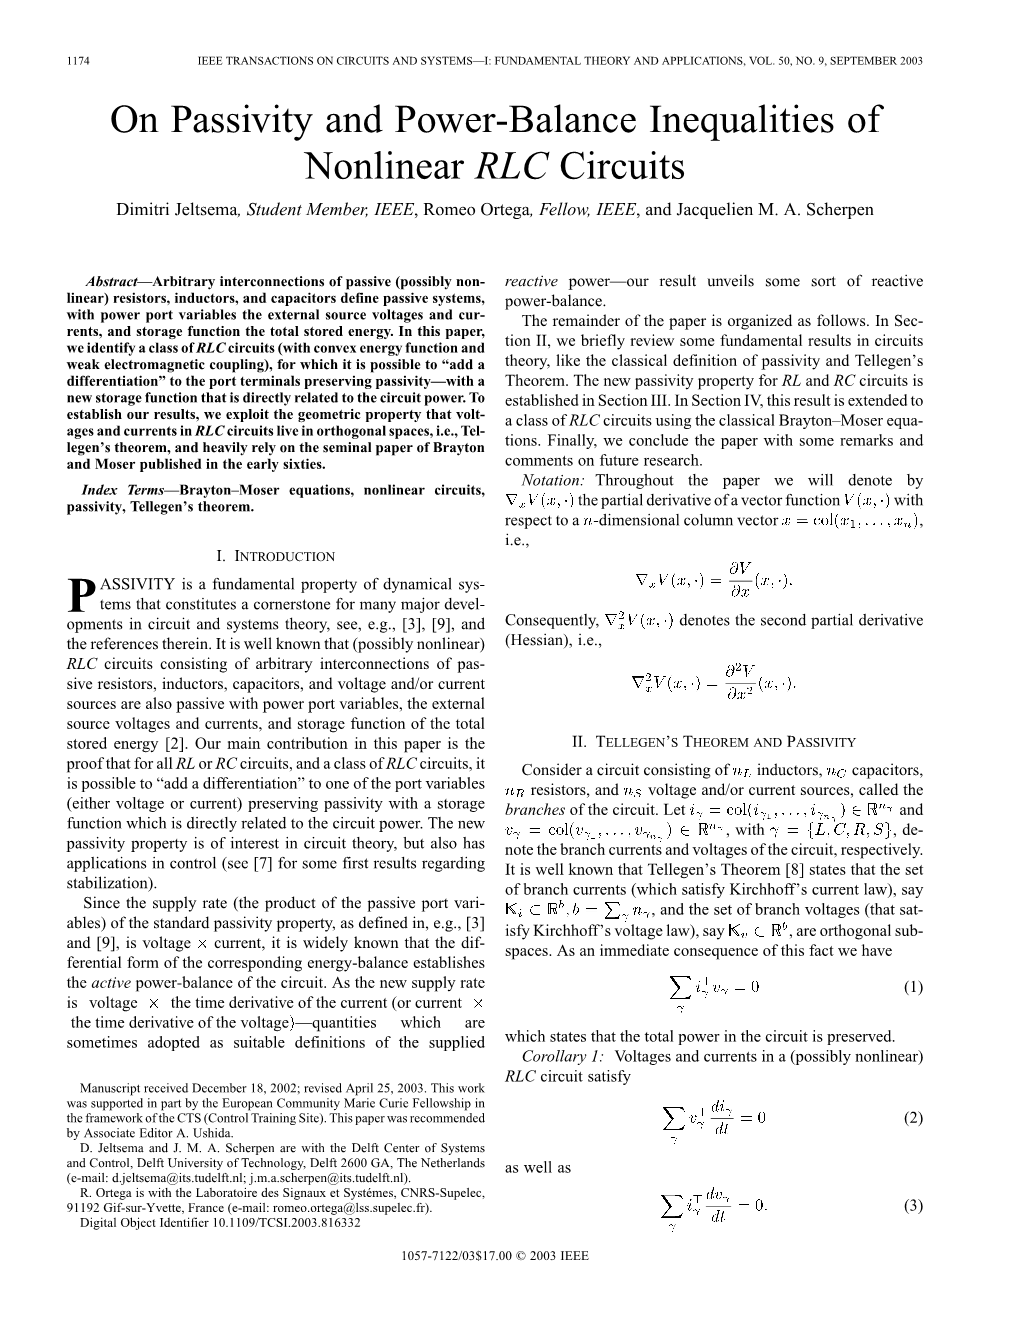 On Passivity and Power-Balance Inequalities of Nonlinear RLC Circuits Dimitri Jeltsema, Student Member, IEEE, Romeo Ortega, Fellow, IEEE, and Jacquelien M